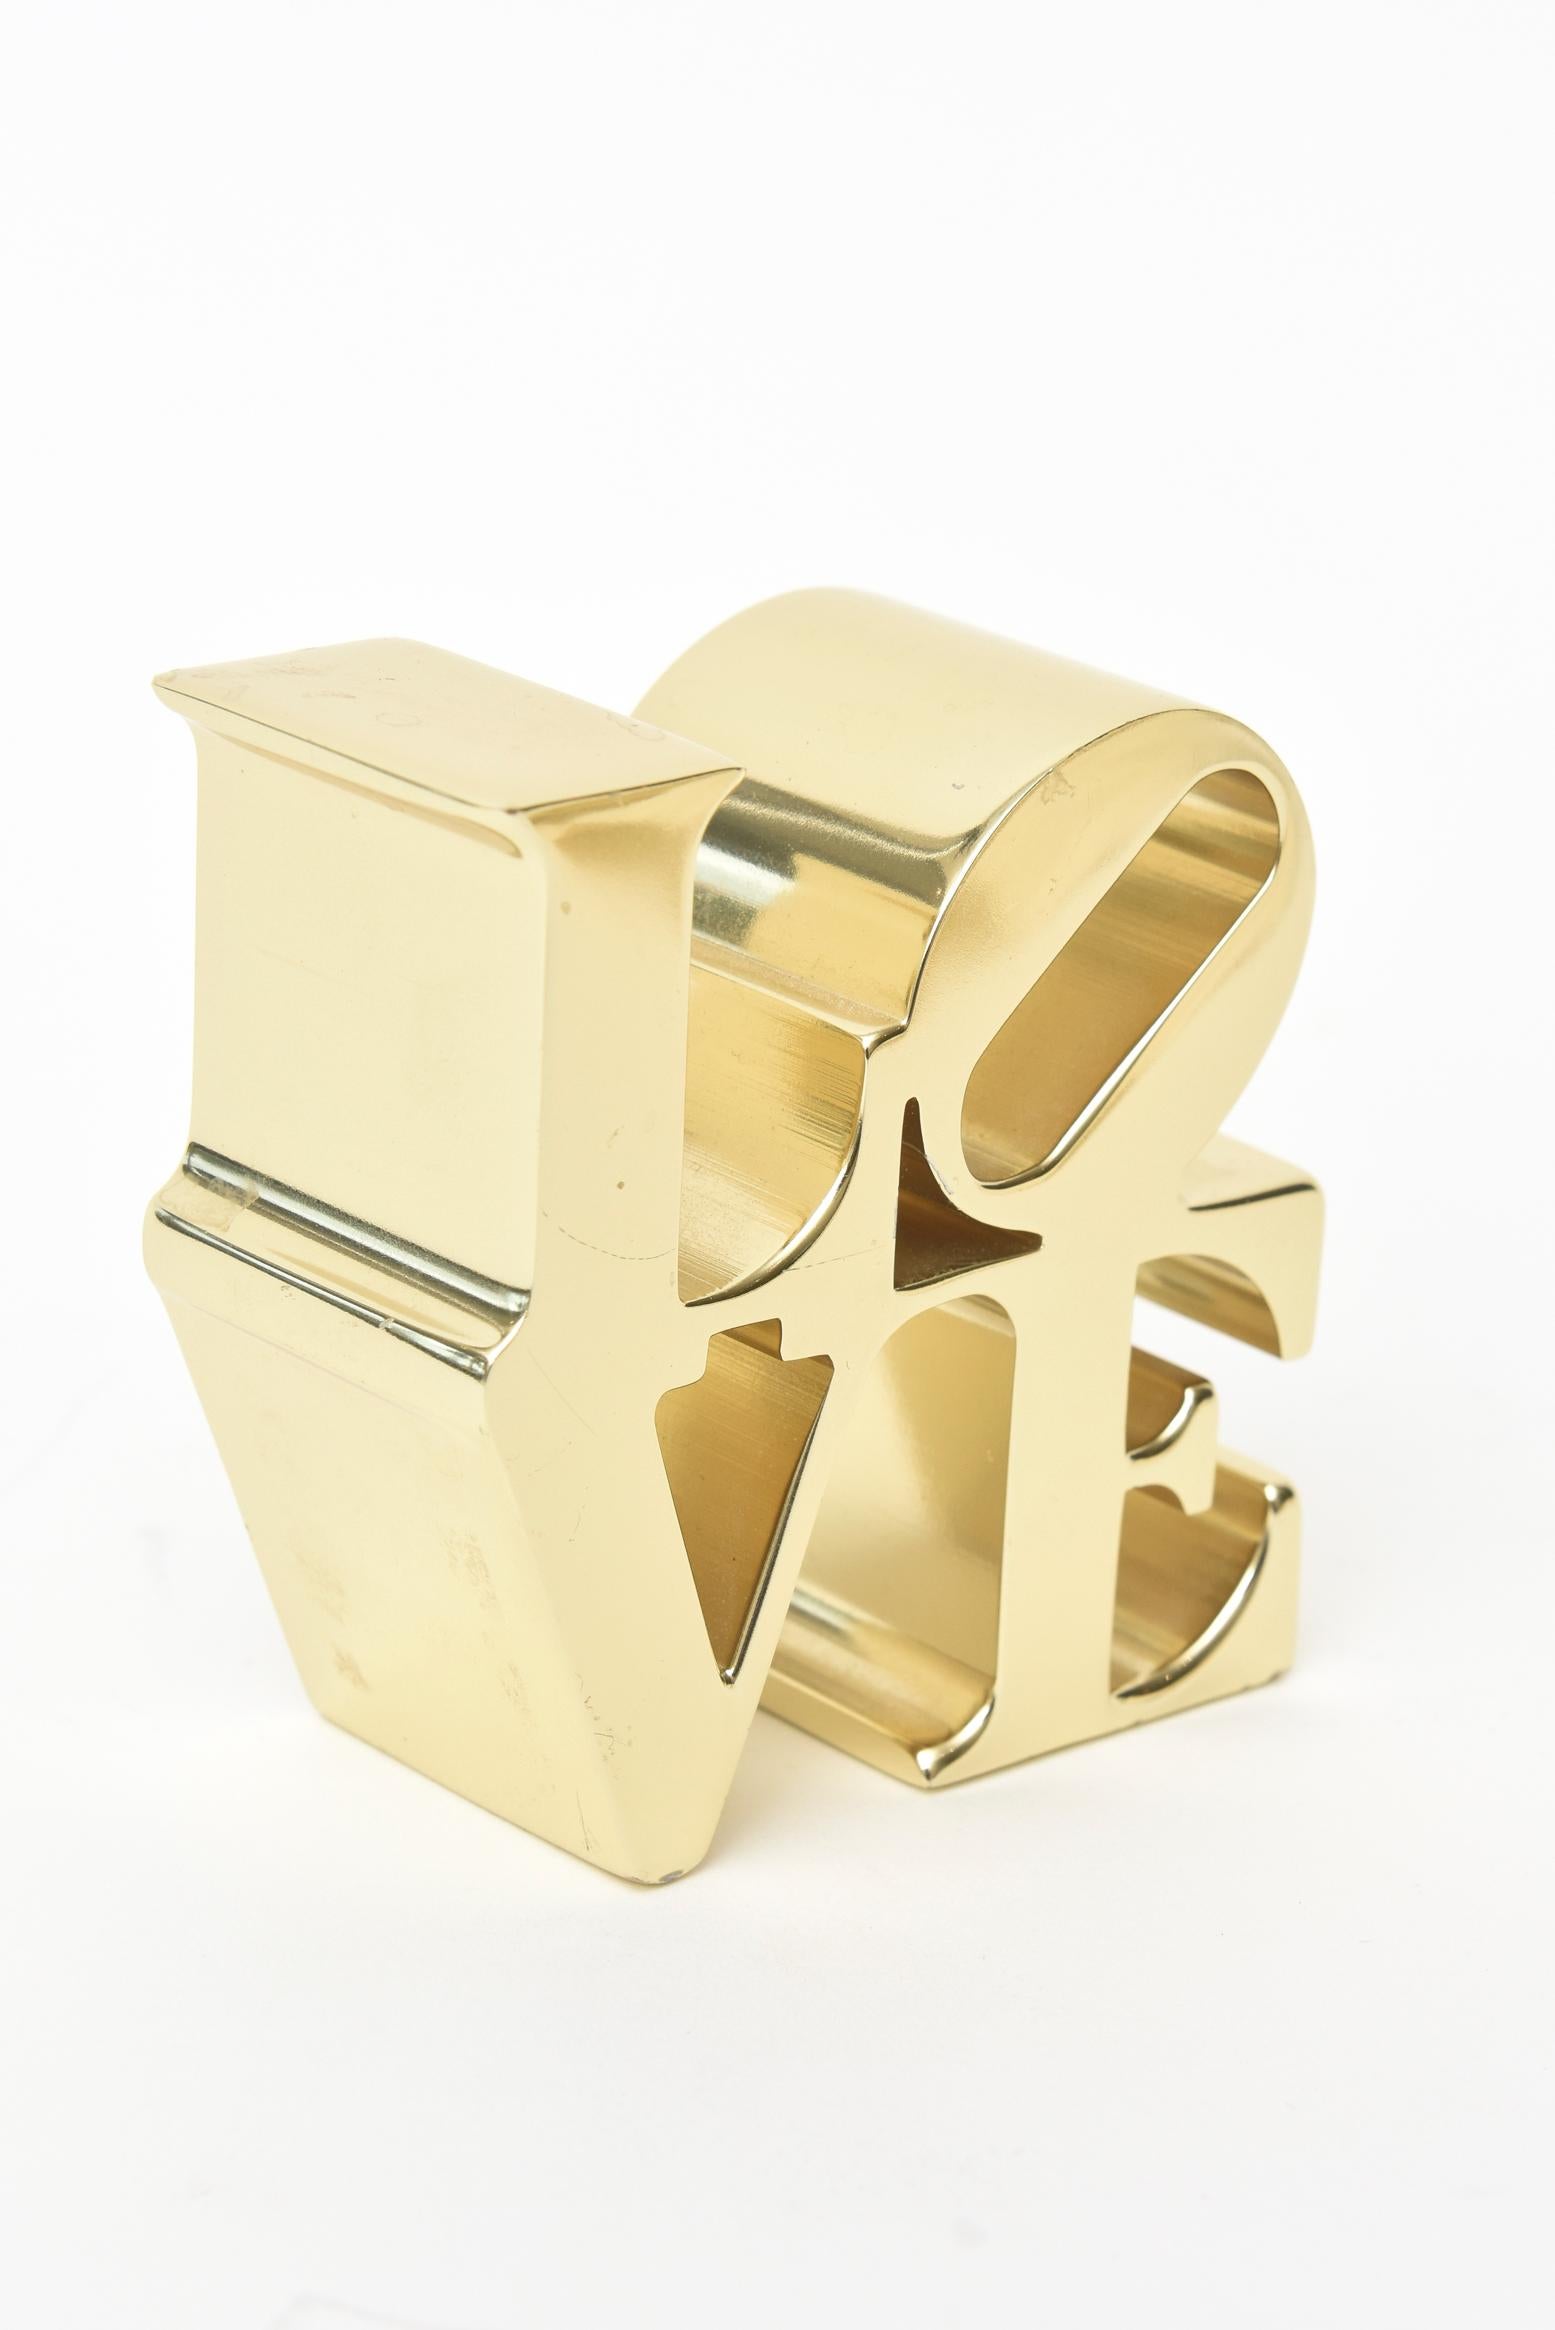 This iconic vintage small Robert Indiana brass LOVE paperweight sculpture is from the 1970s and was originally sold in museum stores at the time most notably MOMA in NYC. Great for desktop, console ensemble and cocktail table. This would make a